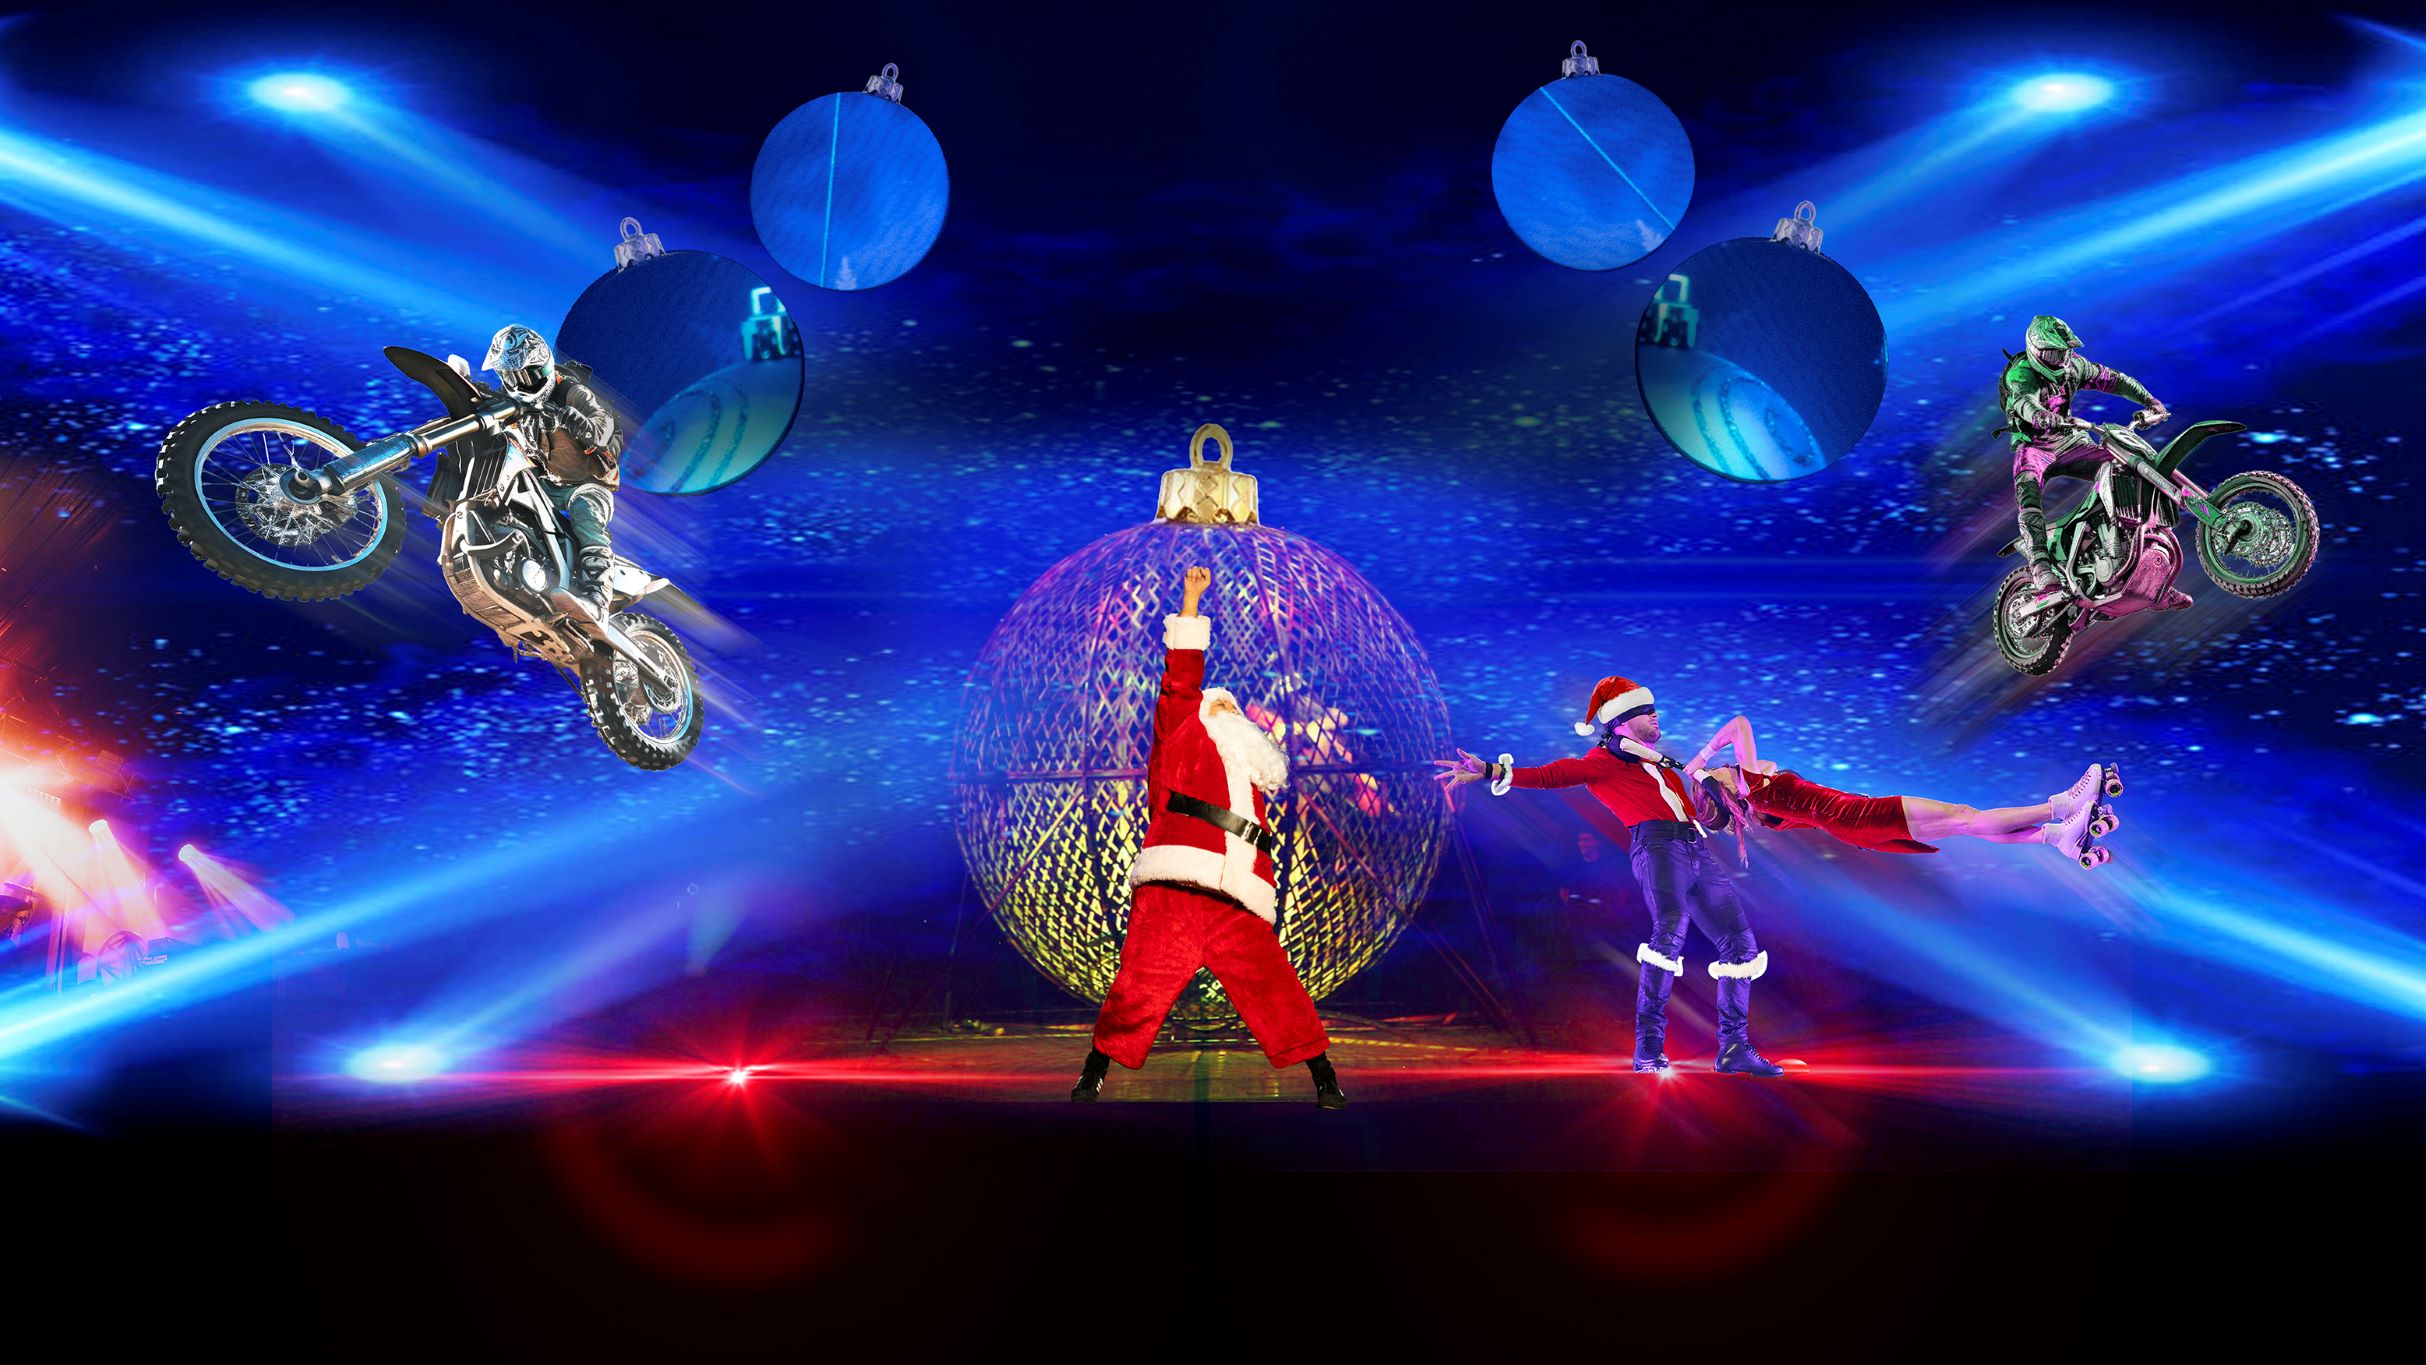 A Christmas RockStory: A Holiday Circus Spectacular! in Mississauga promo photo for Me + 3 Promotional  presale offer code